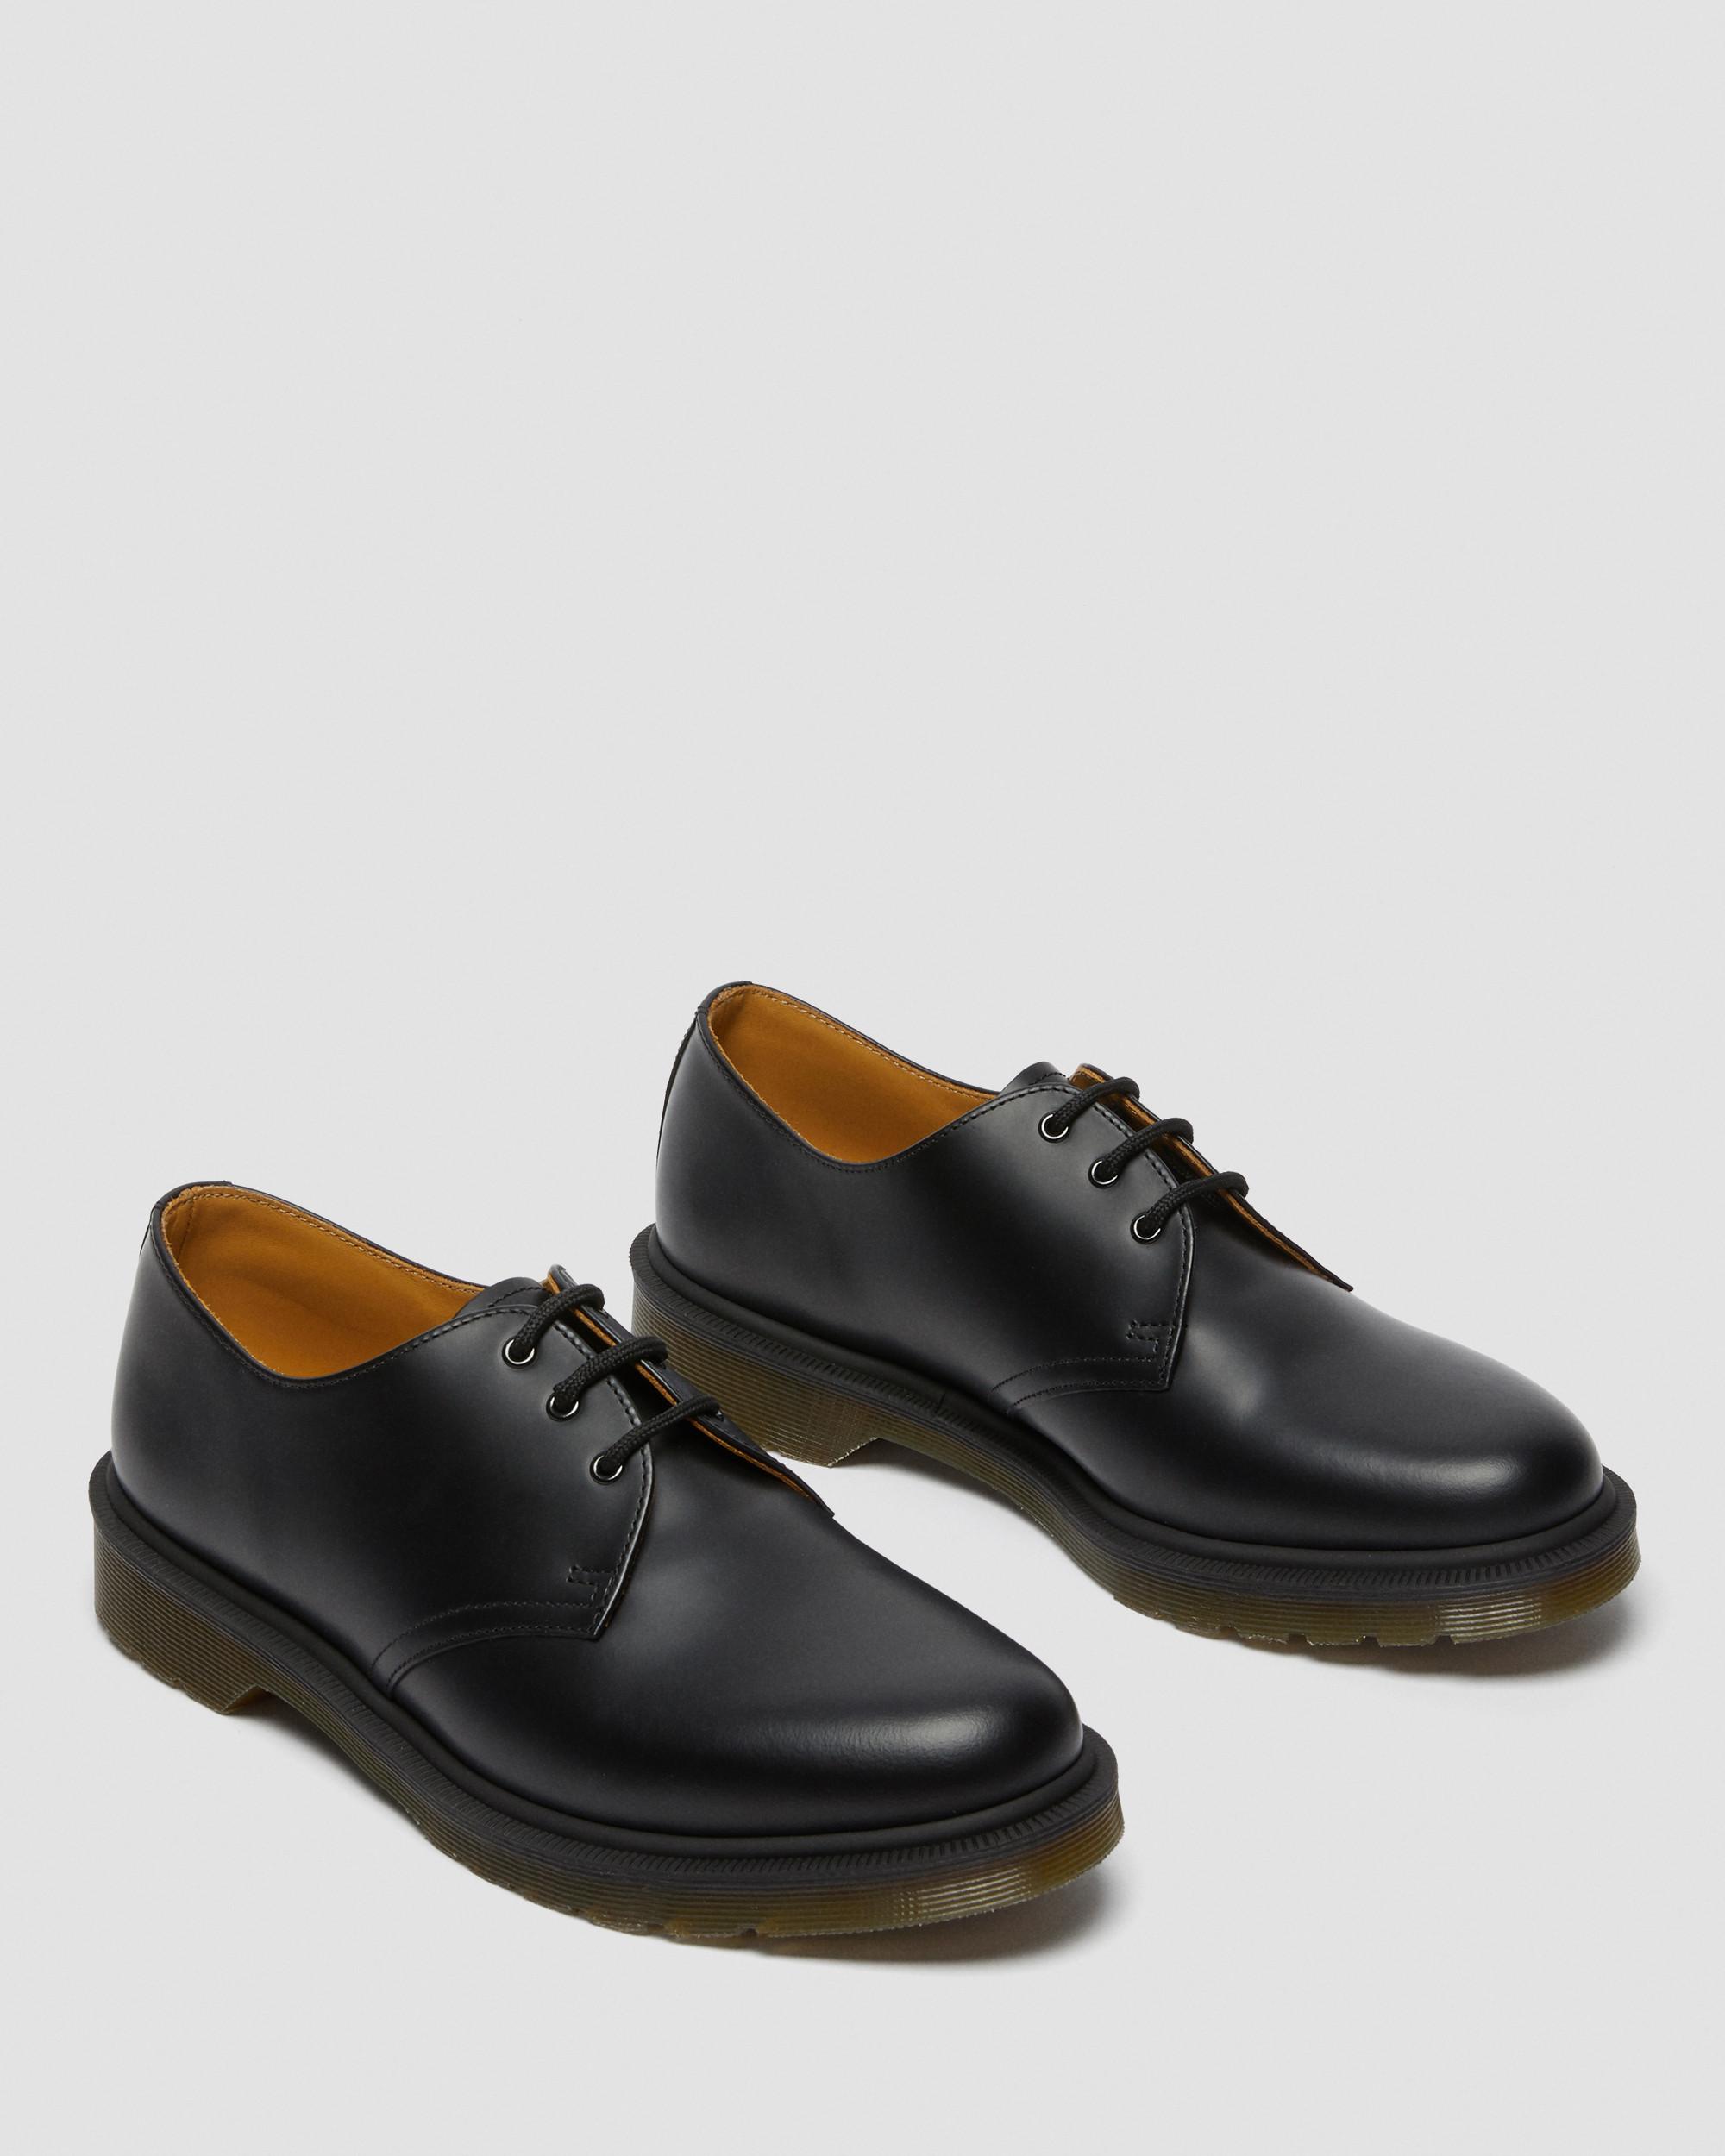 1461 Narrow Plain Welt Smooth Leather Oxford Shoes in Black